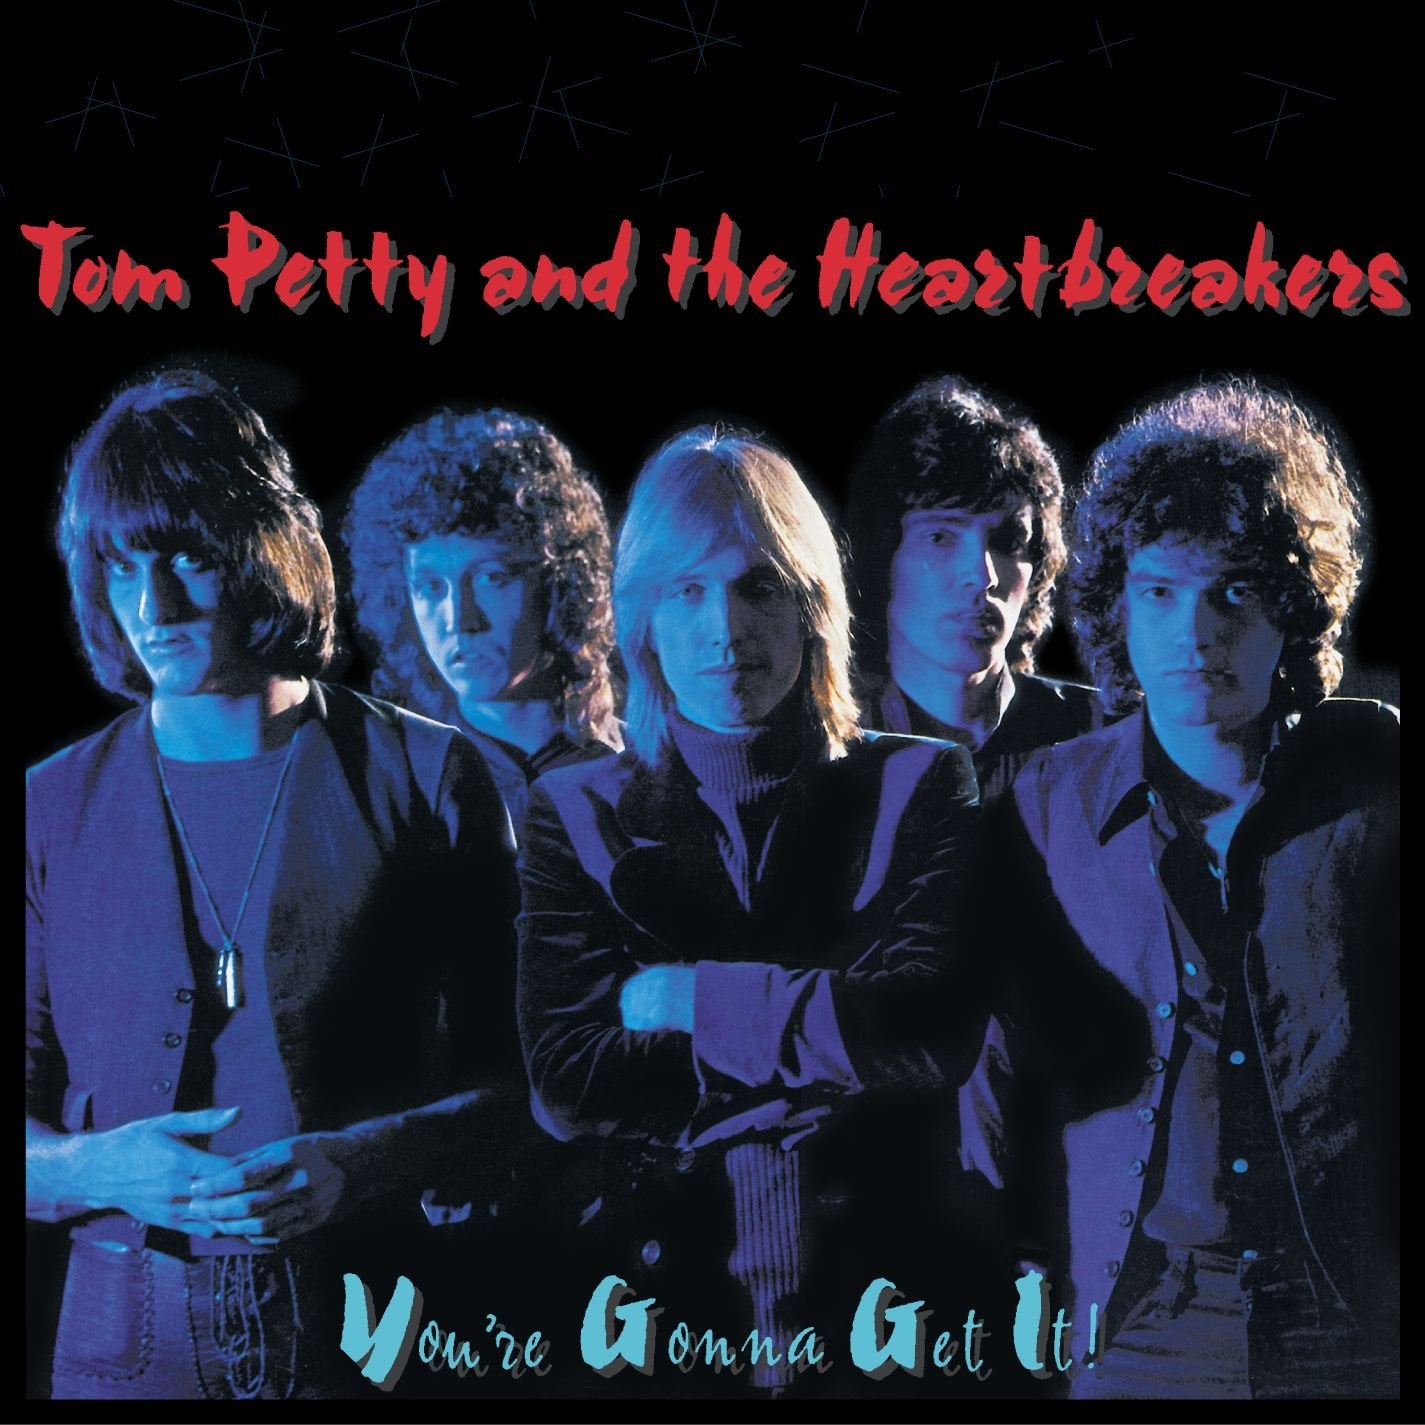 TOM PETTY AND THE HEARTBREAKERS - YOU'RE GONNA GET IT! - VINYL LP - Wah Wah Records